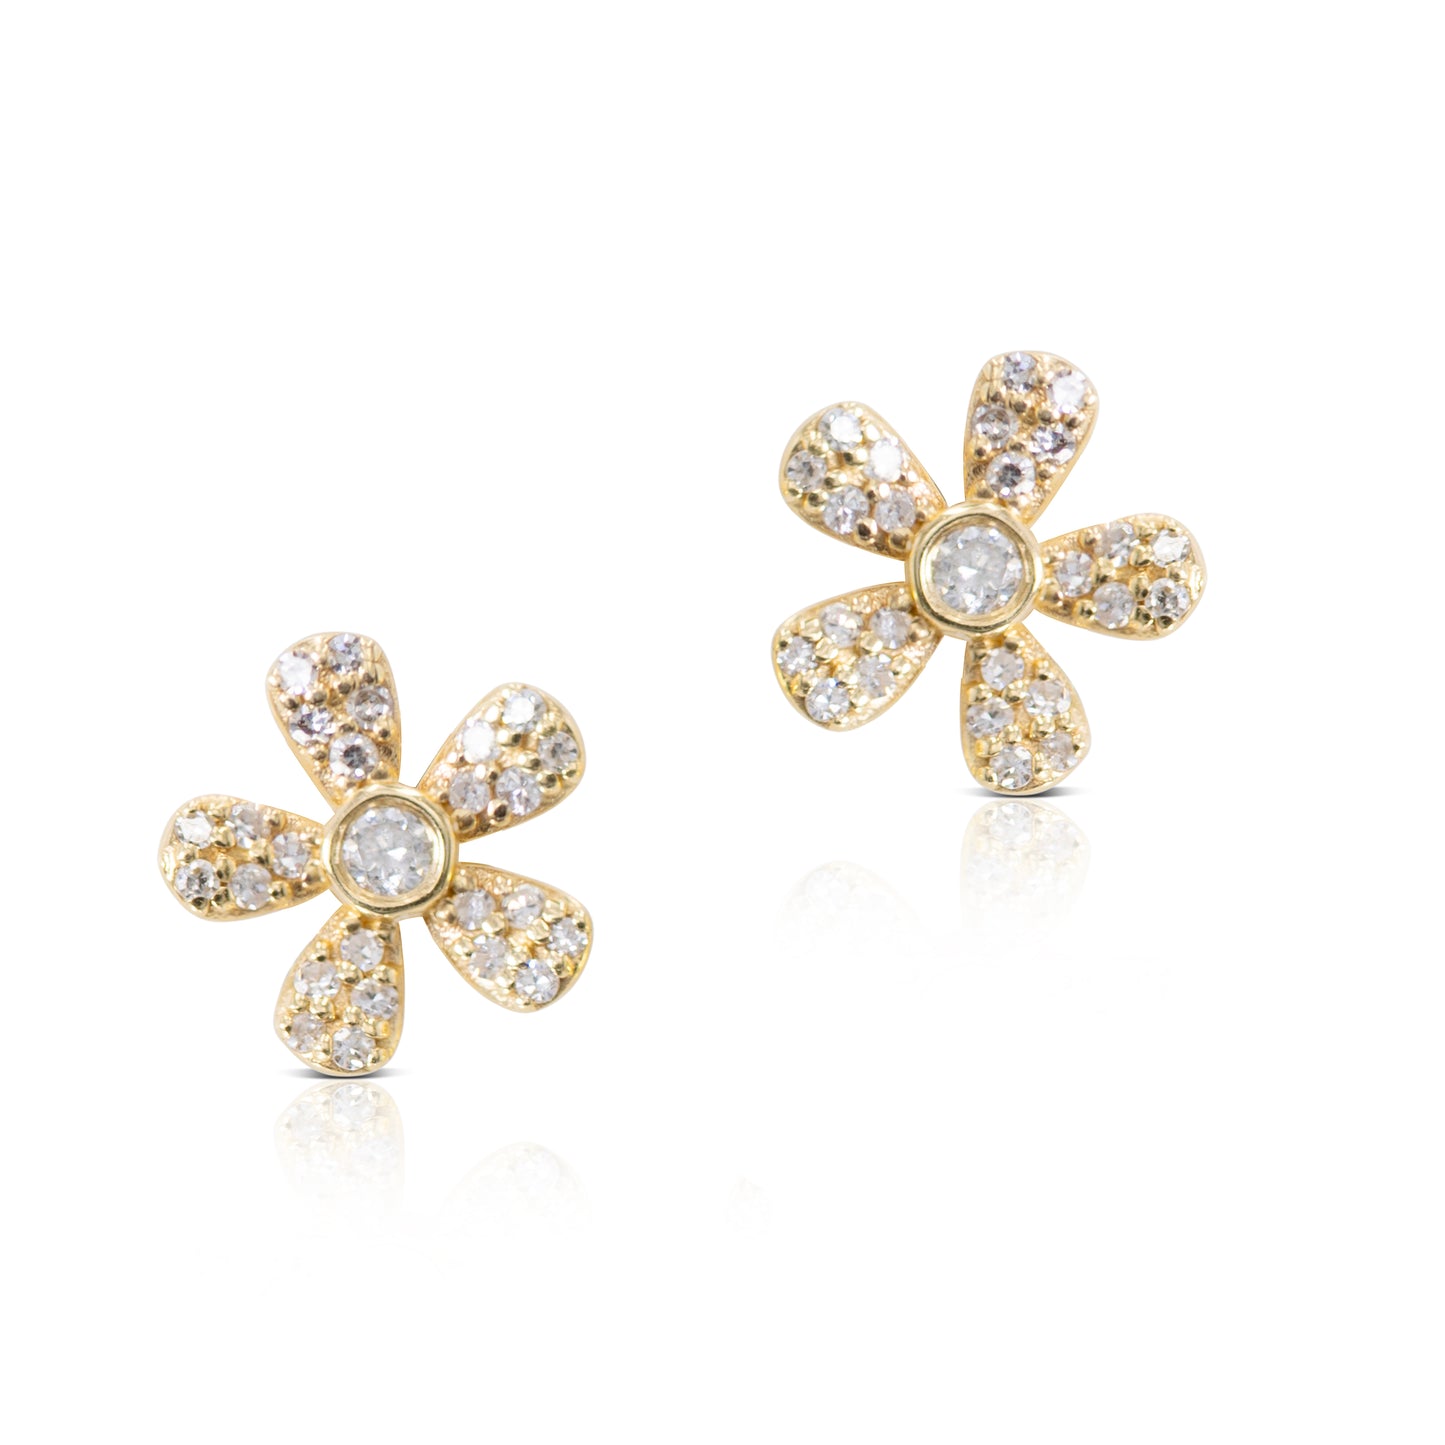 14K GOLD AND DIAMOND FLORAL EARRINGS